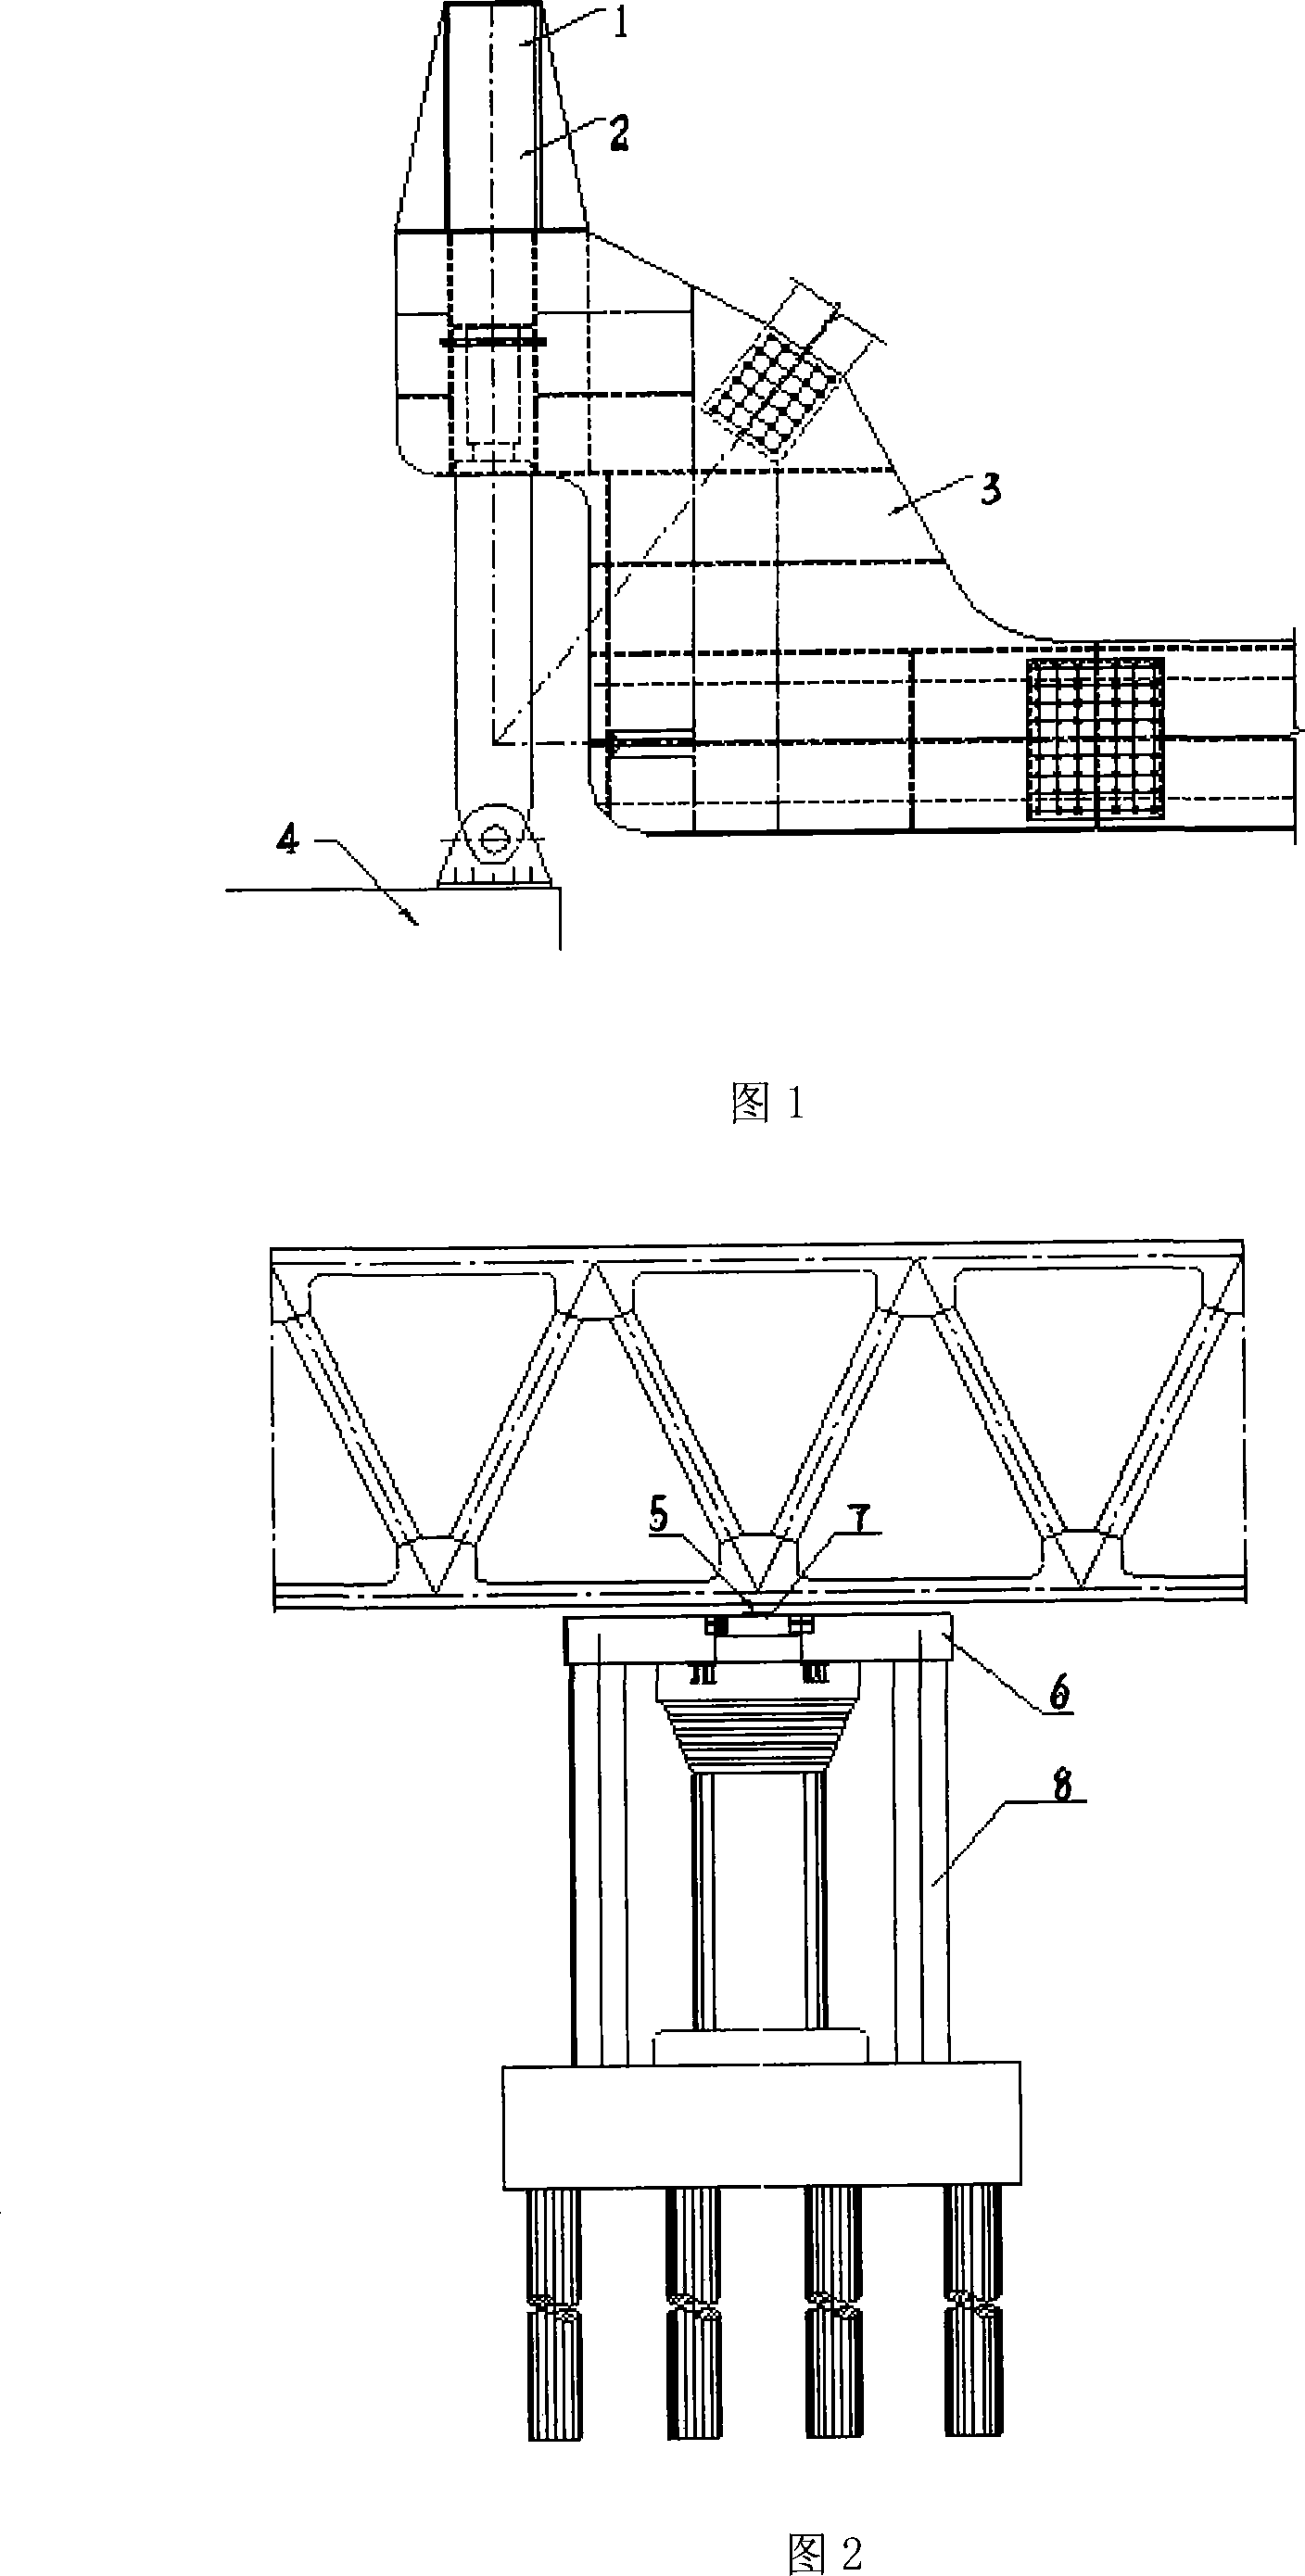 Portrait multi-point continuously dragging construction method for trussed steel beam